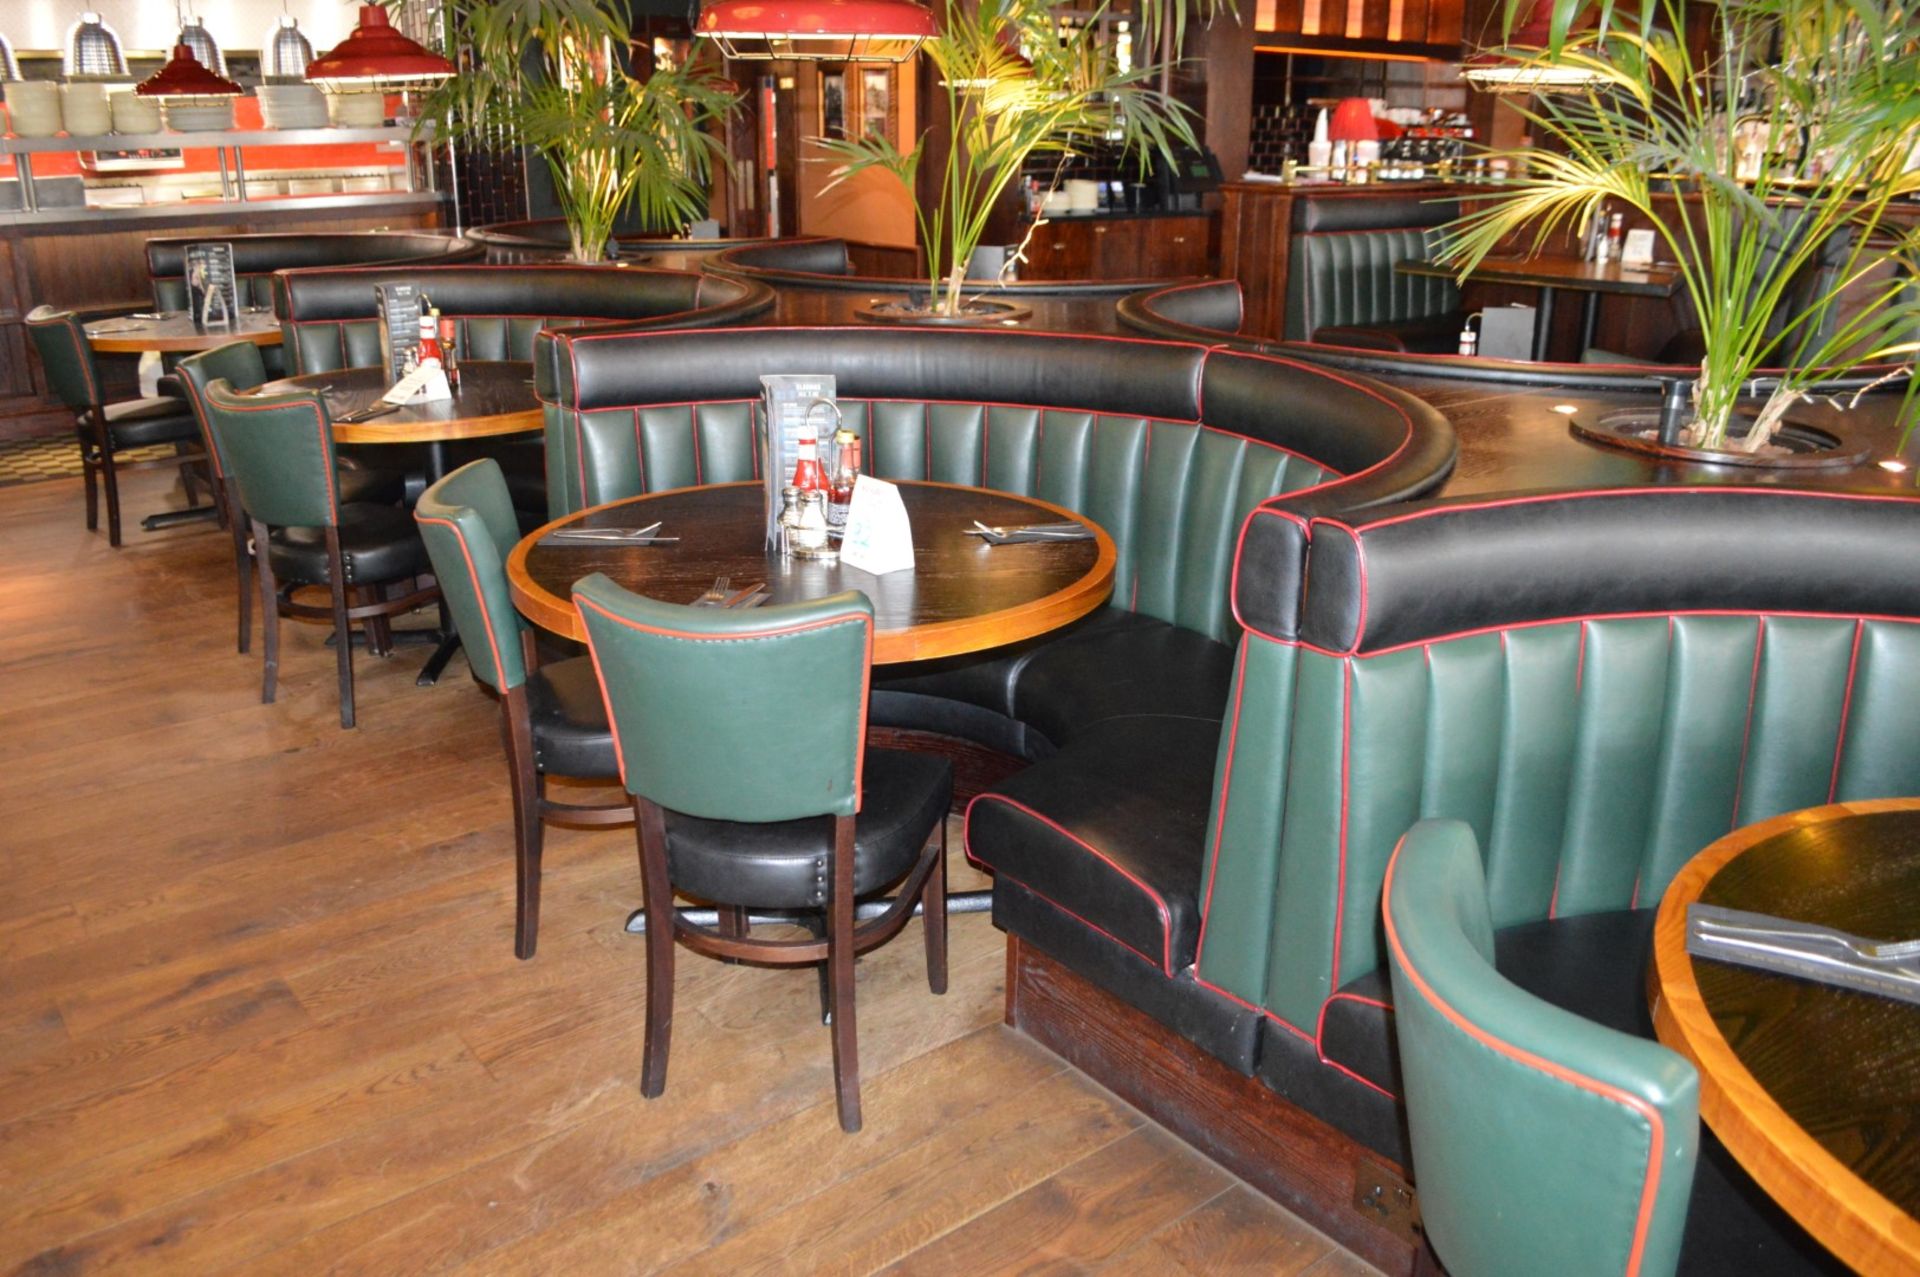 8 x Contemporary Half Circle Seating Booths Waitress Point and Wood Paneling - Features a Leather - Image 5 of 17